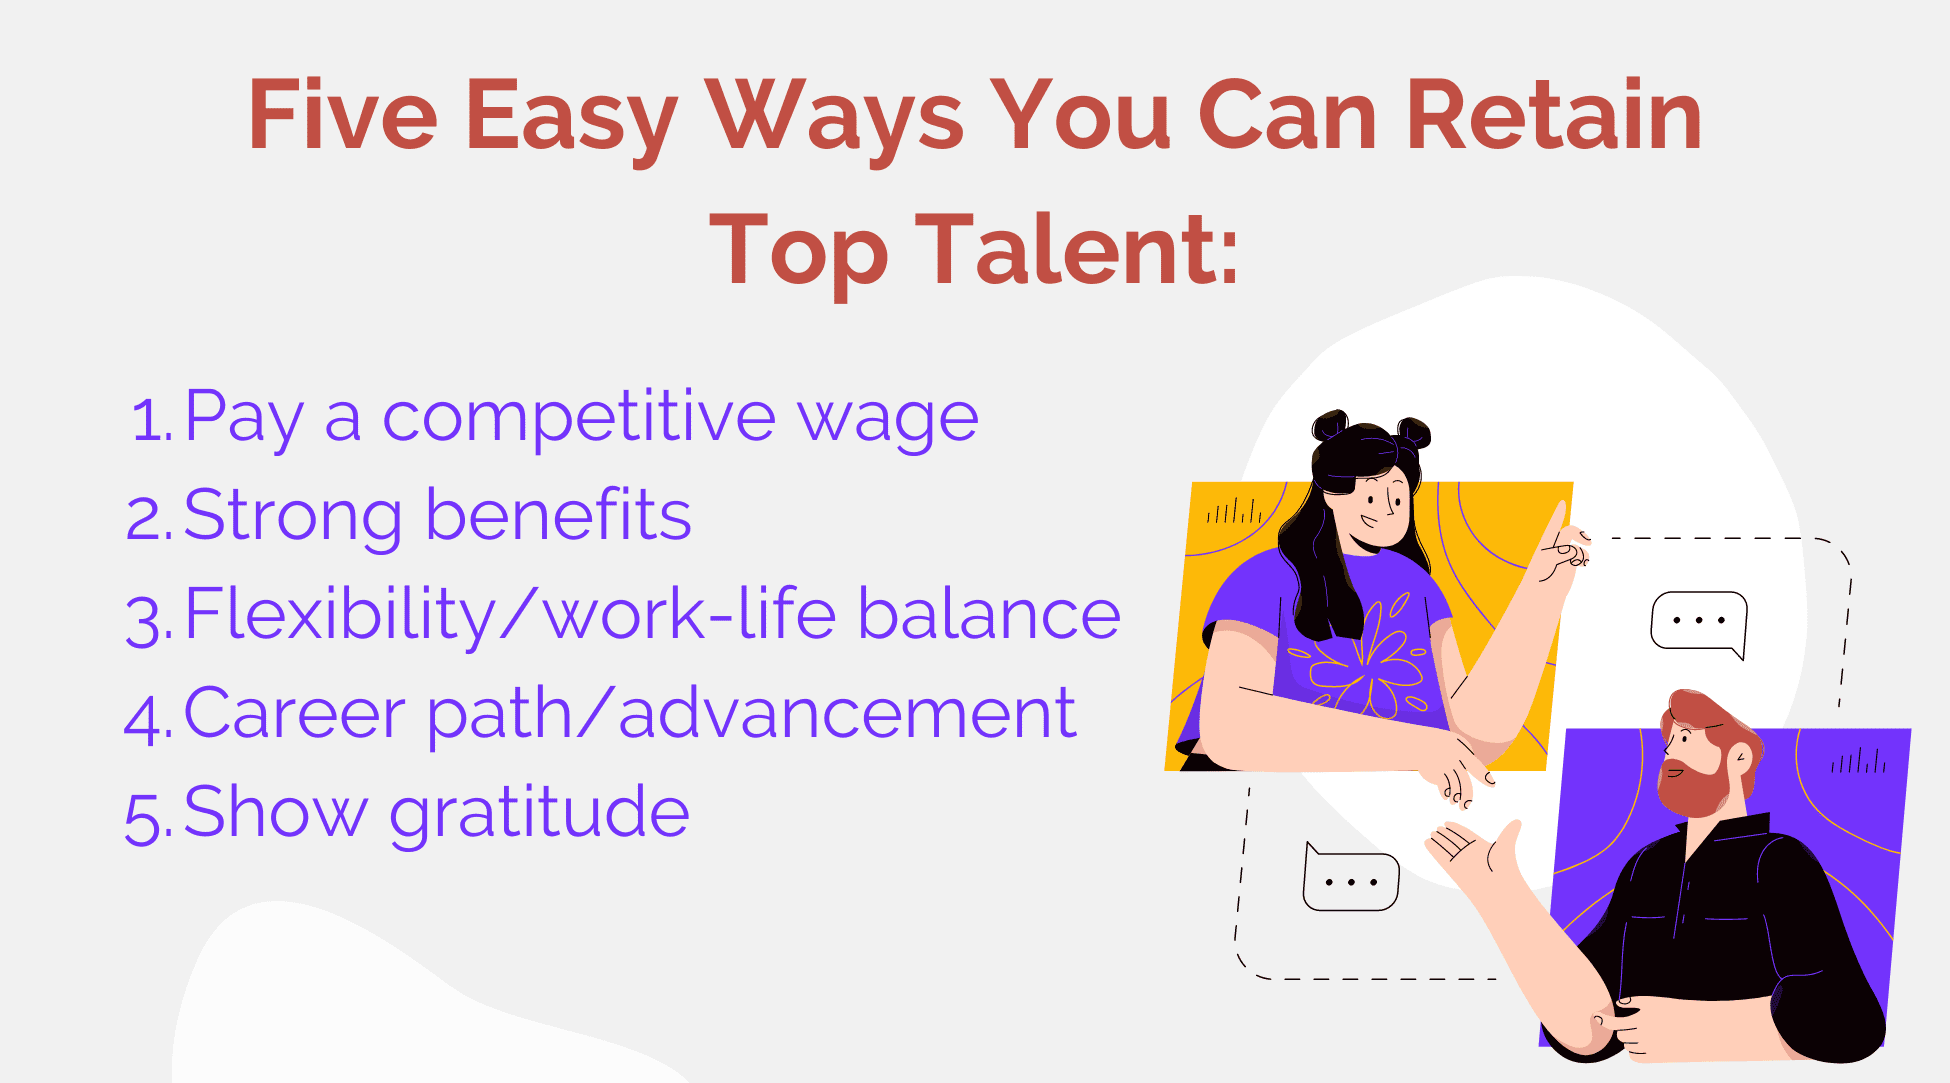 Five Ways to Retain Top Talent blog images  (1)